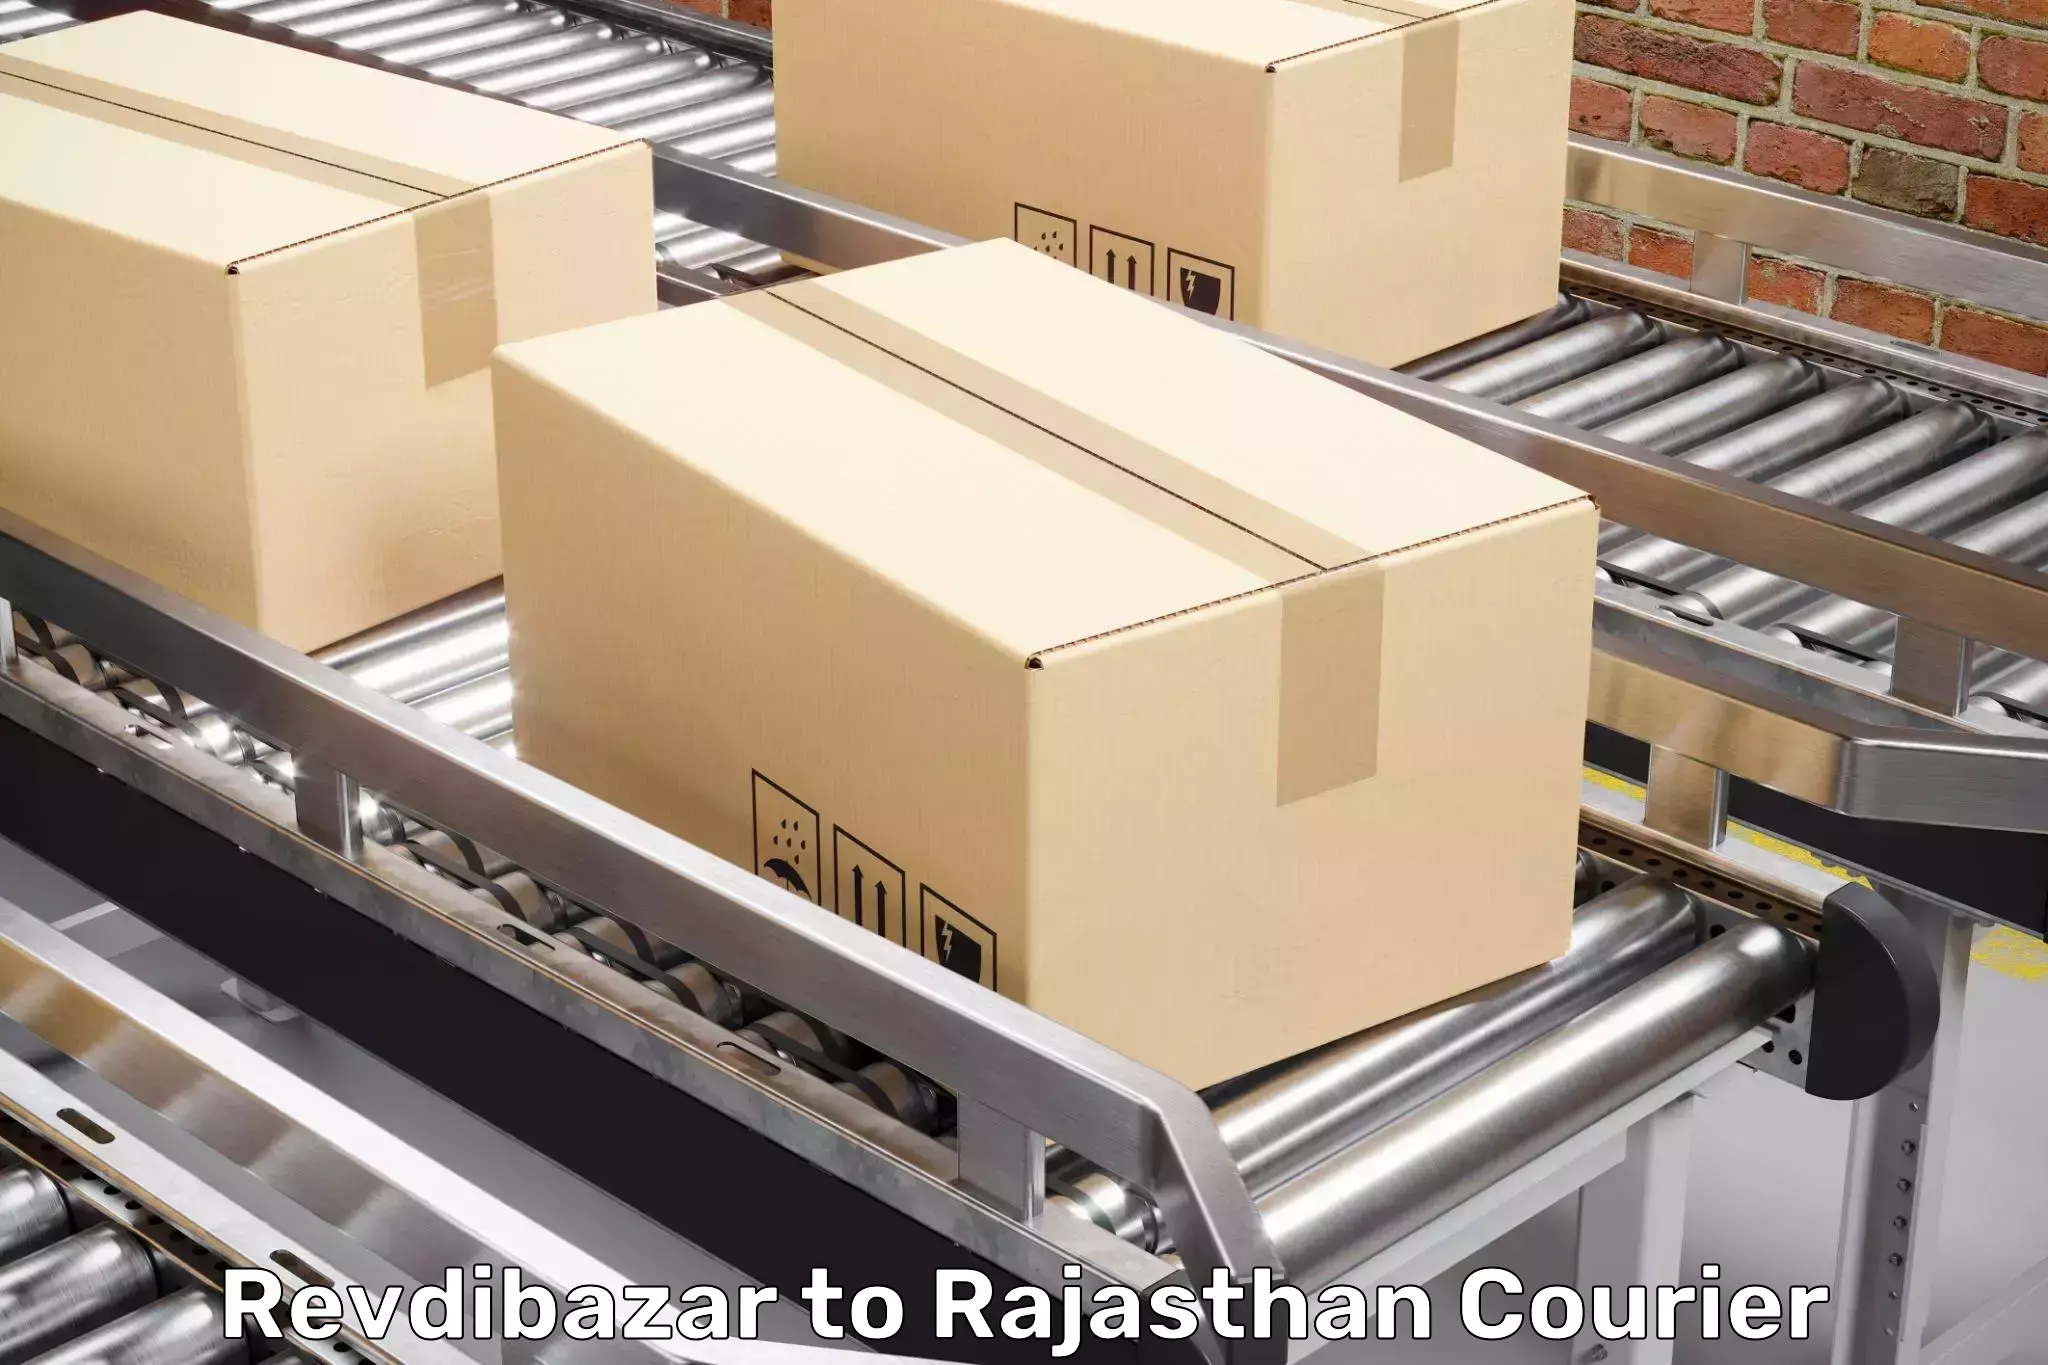 Household shifting services Revdibazar to Piparcity